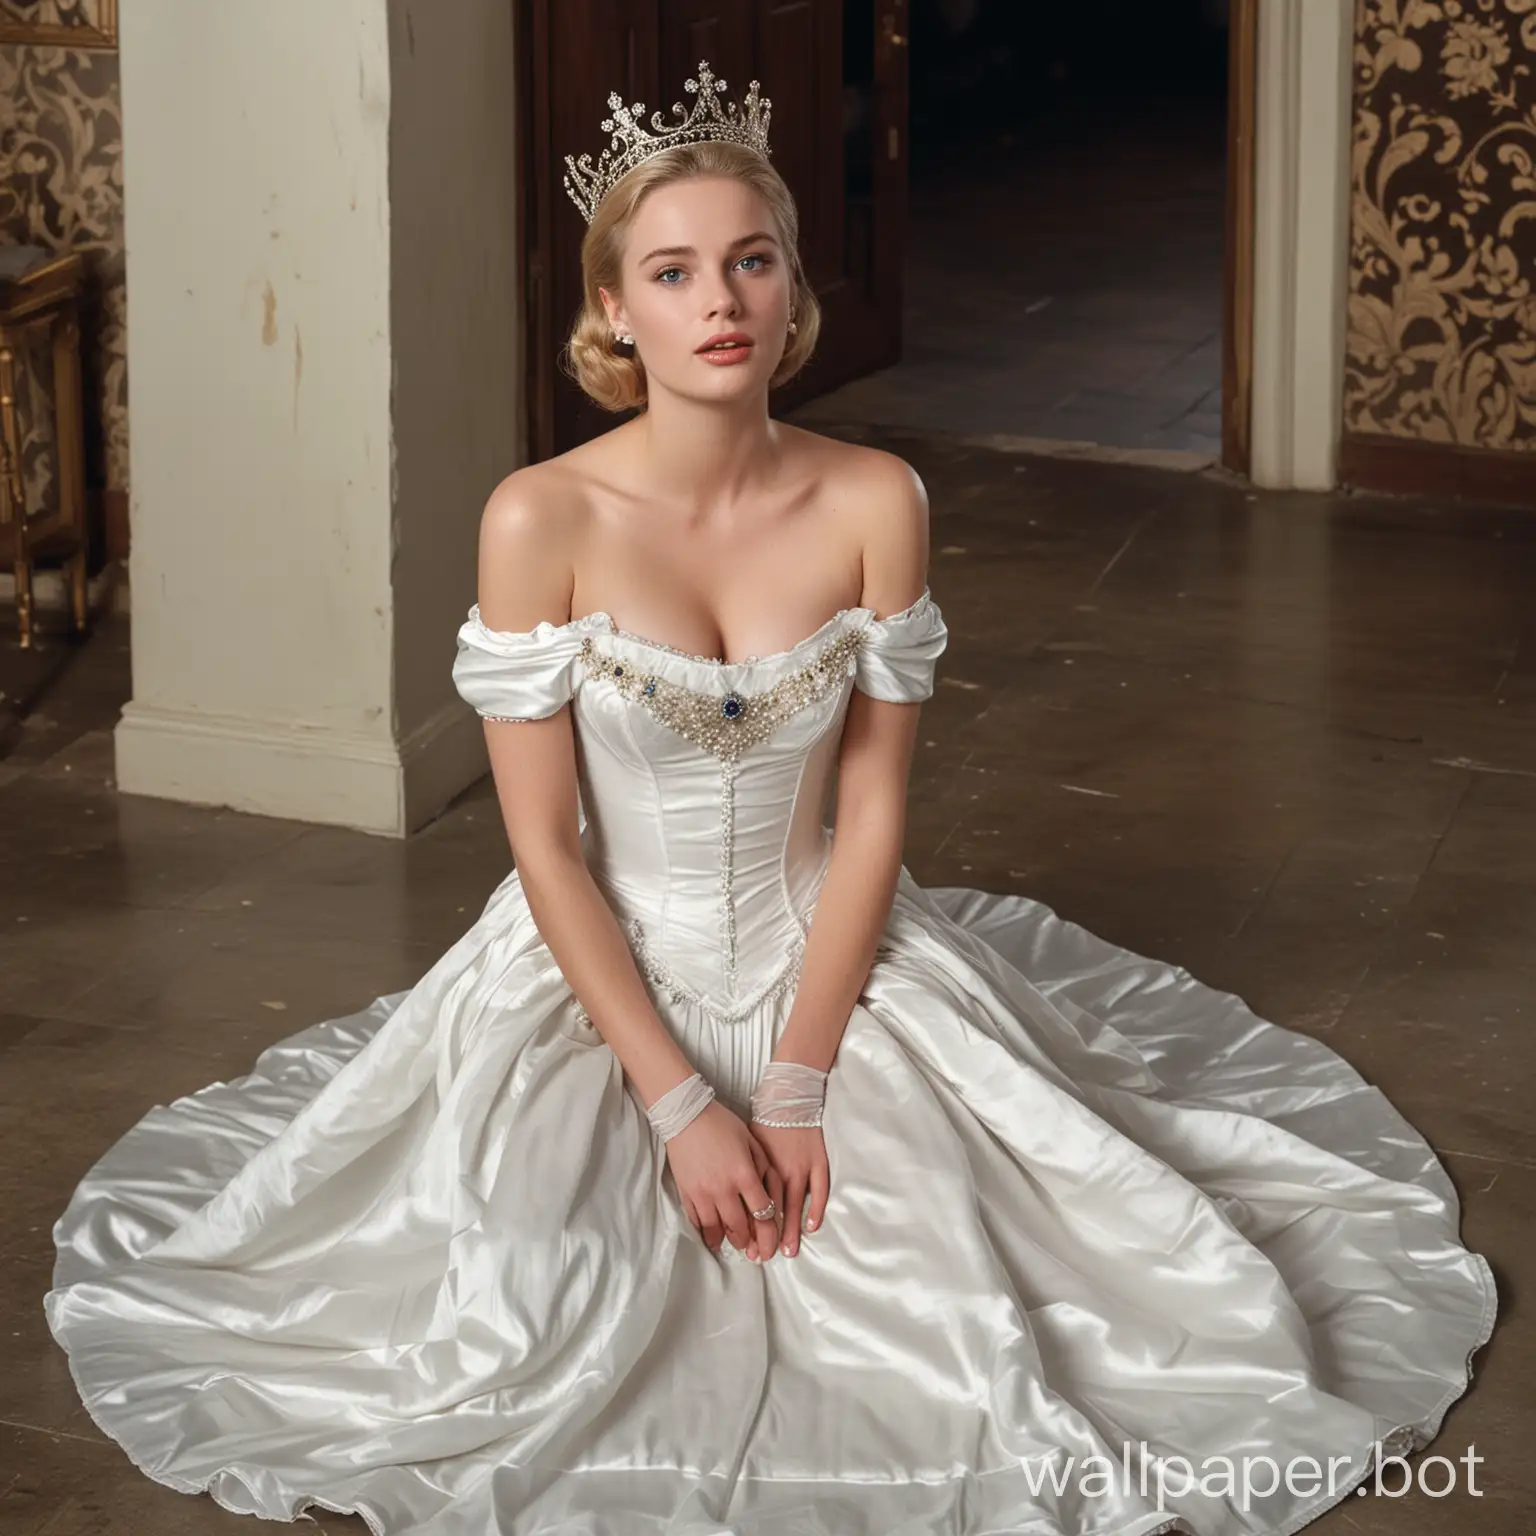 In men's public dirty toilet, the white, sad, beautiful blue-eyed blonde, young actress Grace Kelly, with a crown on her knees, is wearing a white silk off-shoulder sleeveless dress, a white silk push-up corset, and white silk opera length gloves. She has disgust on her face. The white Queen Grace Kelly, with a crown, begs on her knees in front of two black, afro male, dirty hobos or tramps with their pants down. The queen's mouth is open extra wide. View from above